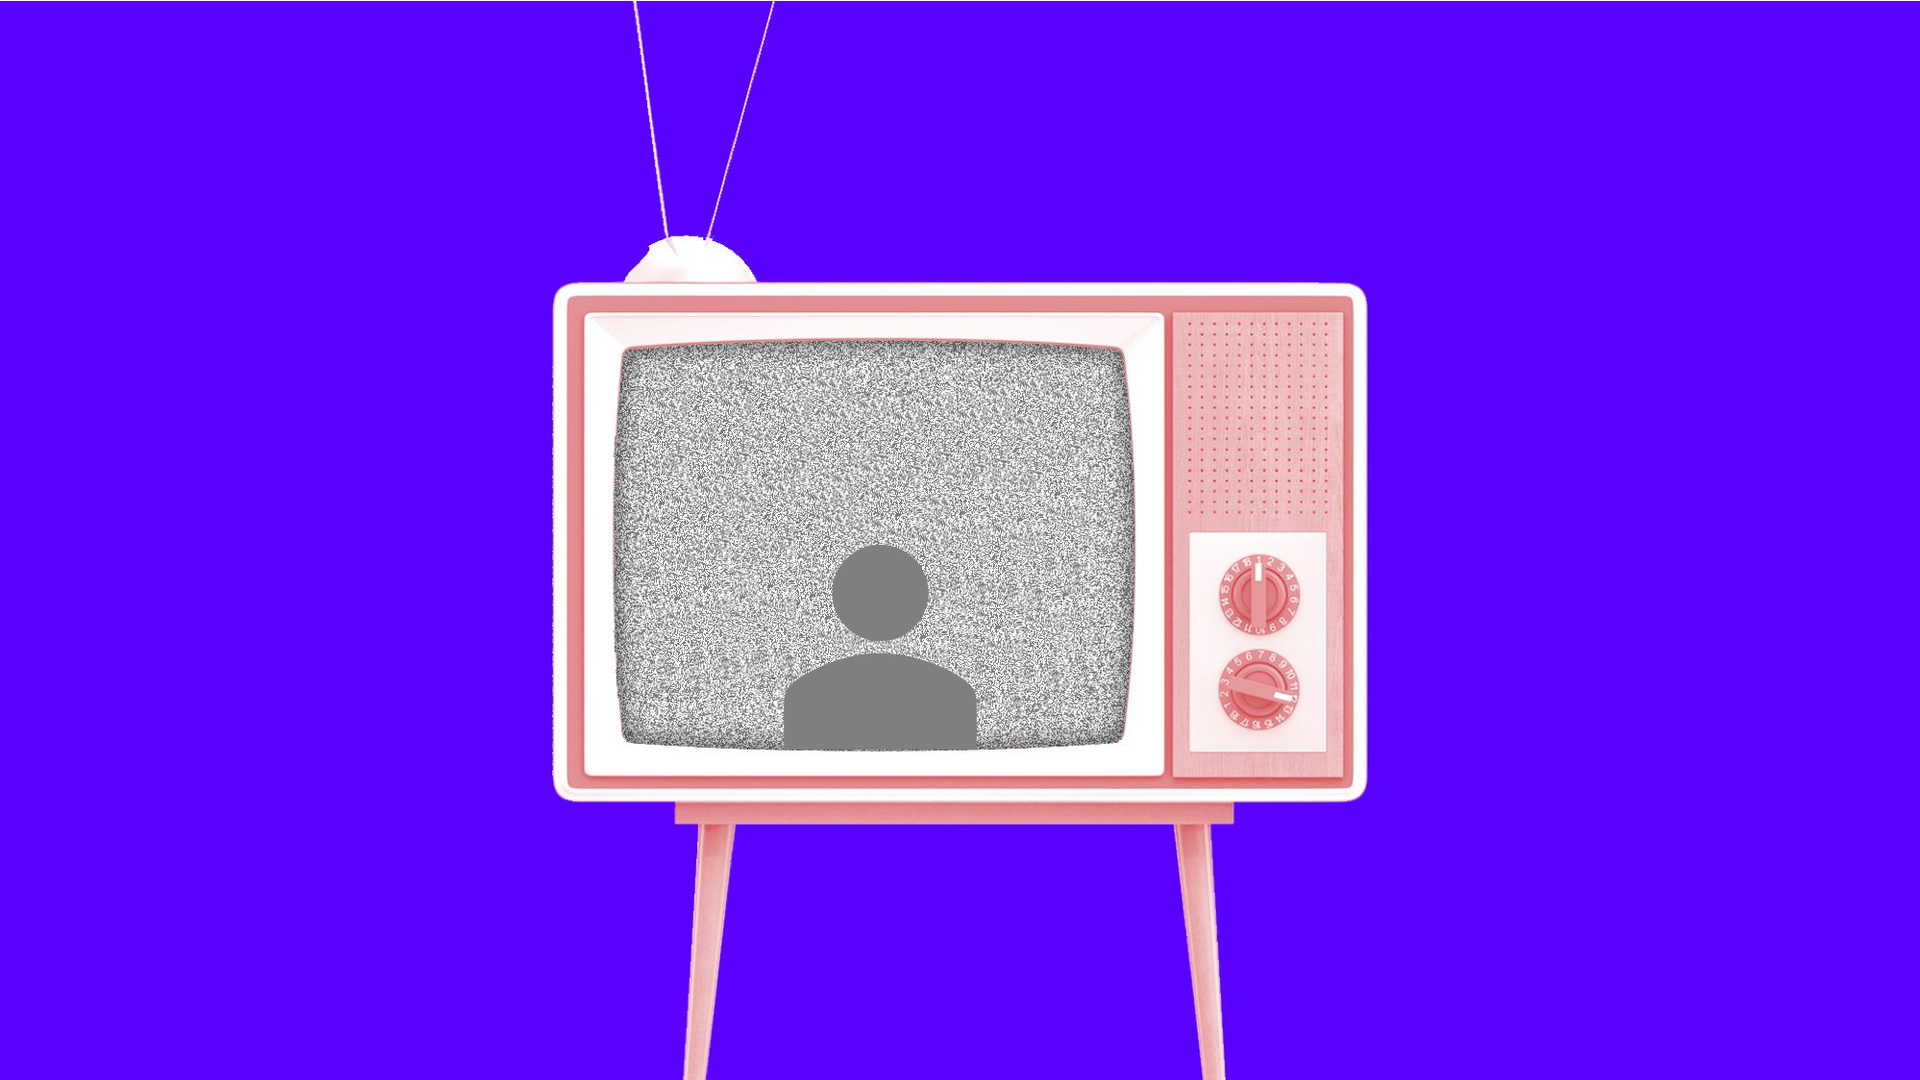 Illustration of a TV set with a social media icon on screen 